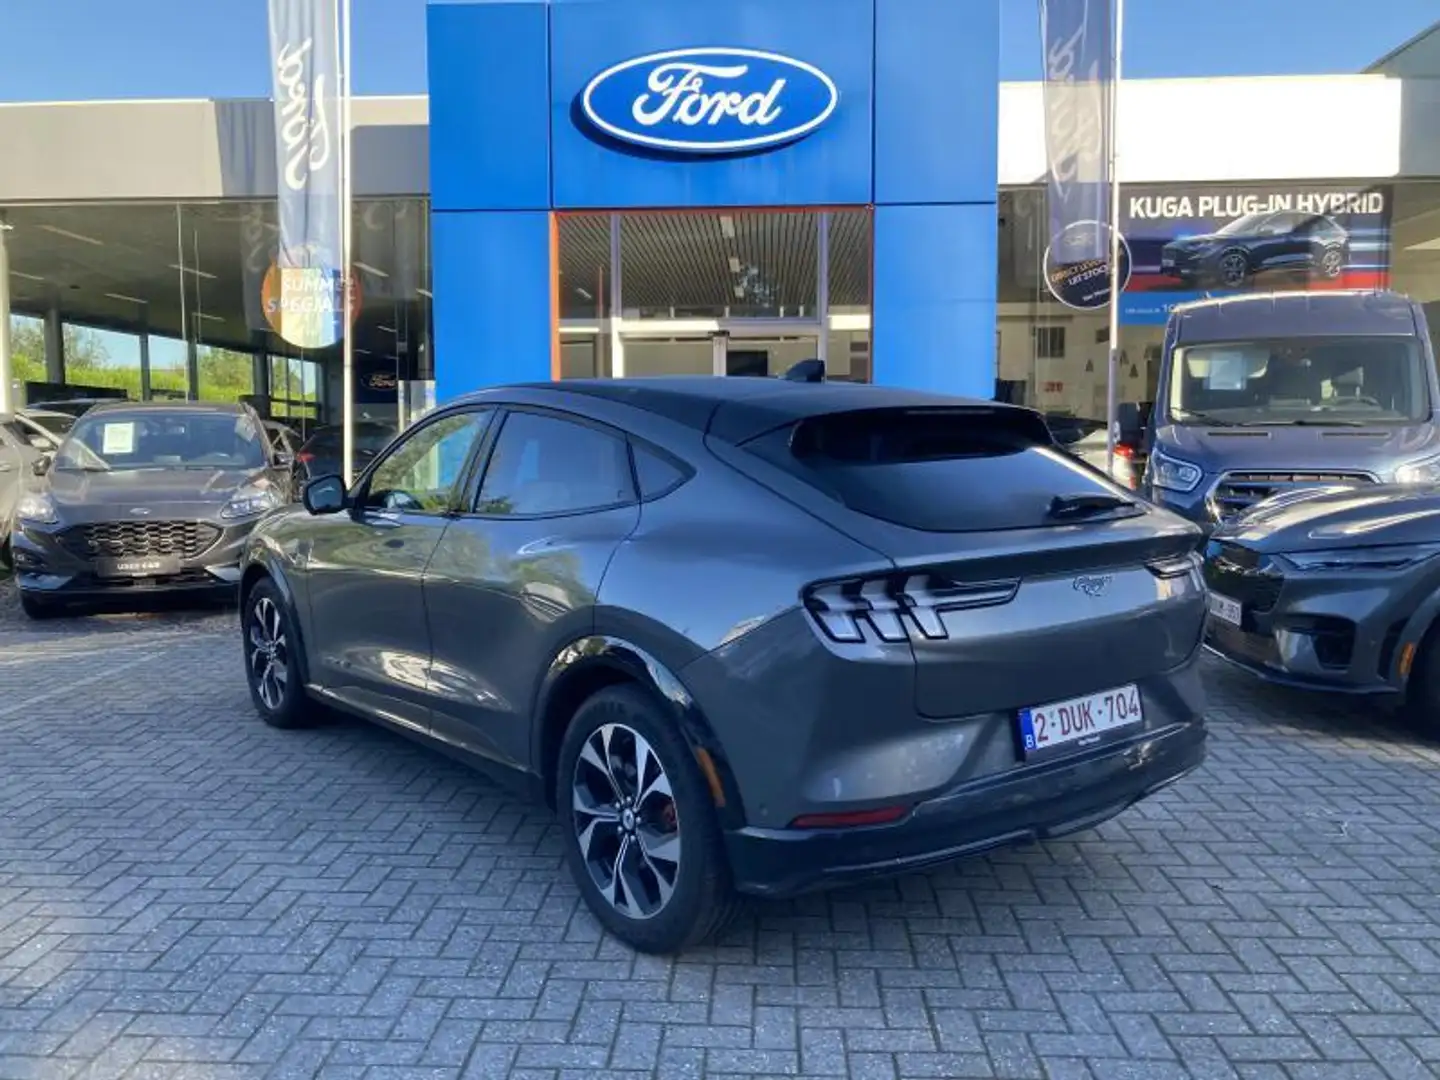 Ford Mustang Mach-E Premium RWD 99kWH|€599/m|Technology Pack|600 Range Grijs - 2